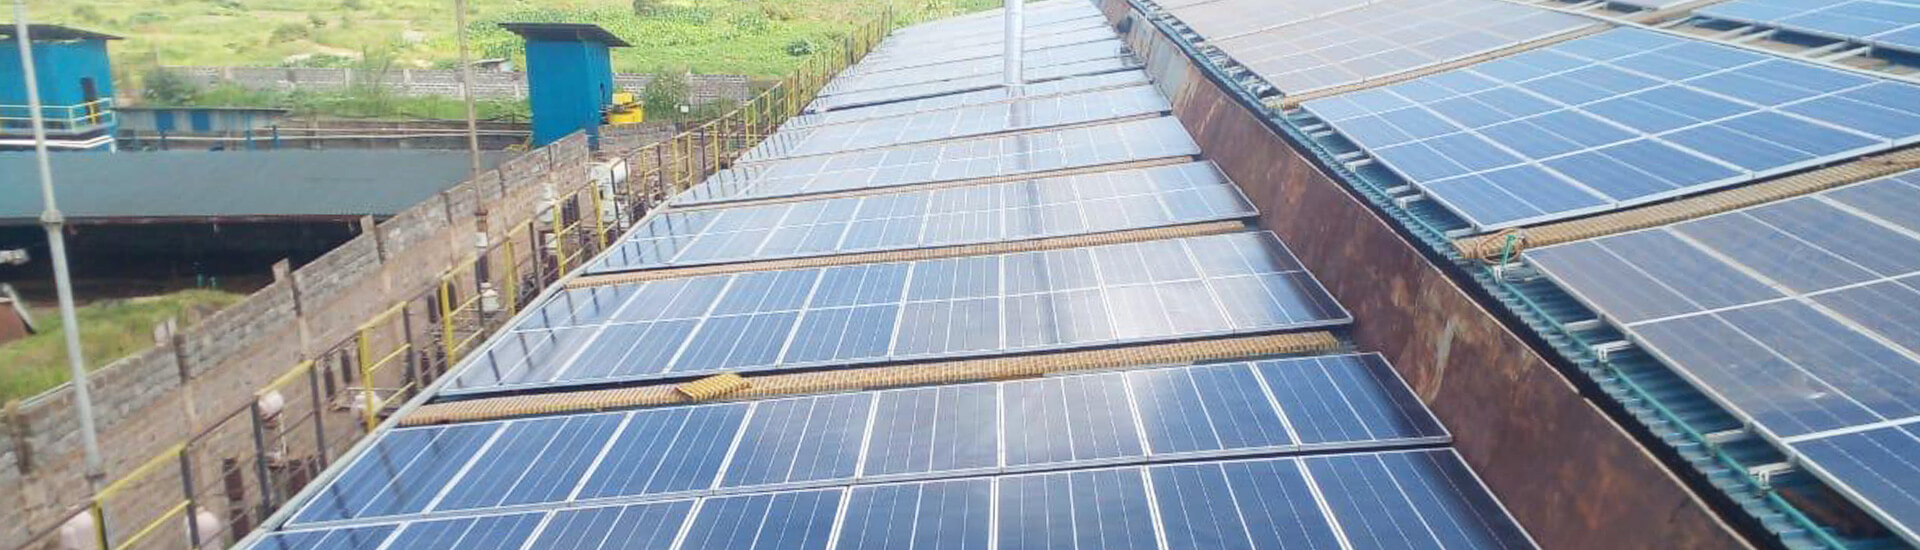 Blue Nile Rolling Mills Limited 1,770 kWp Grid Tied Solar System 